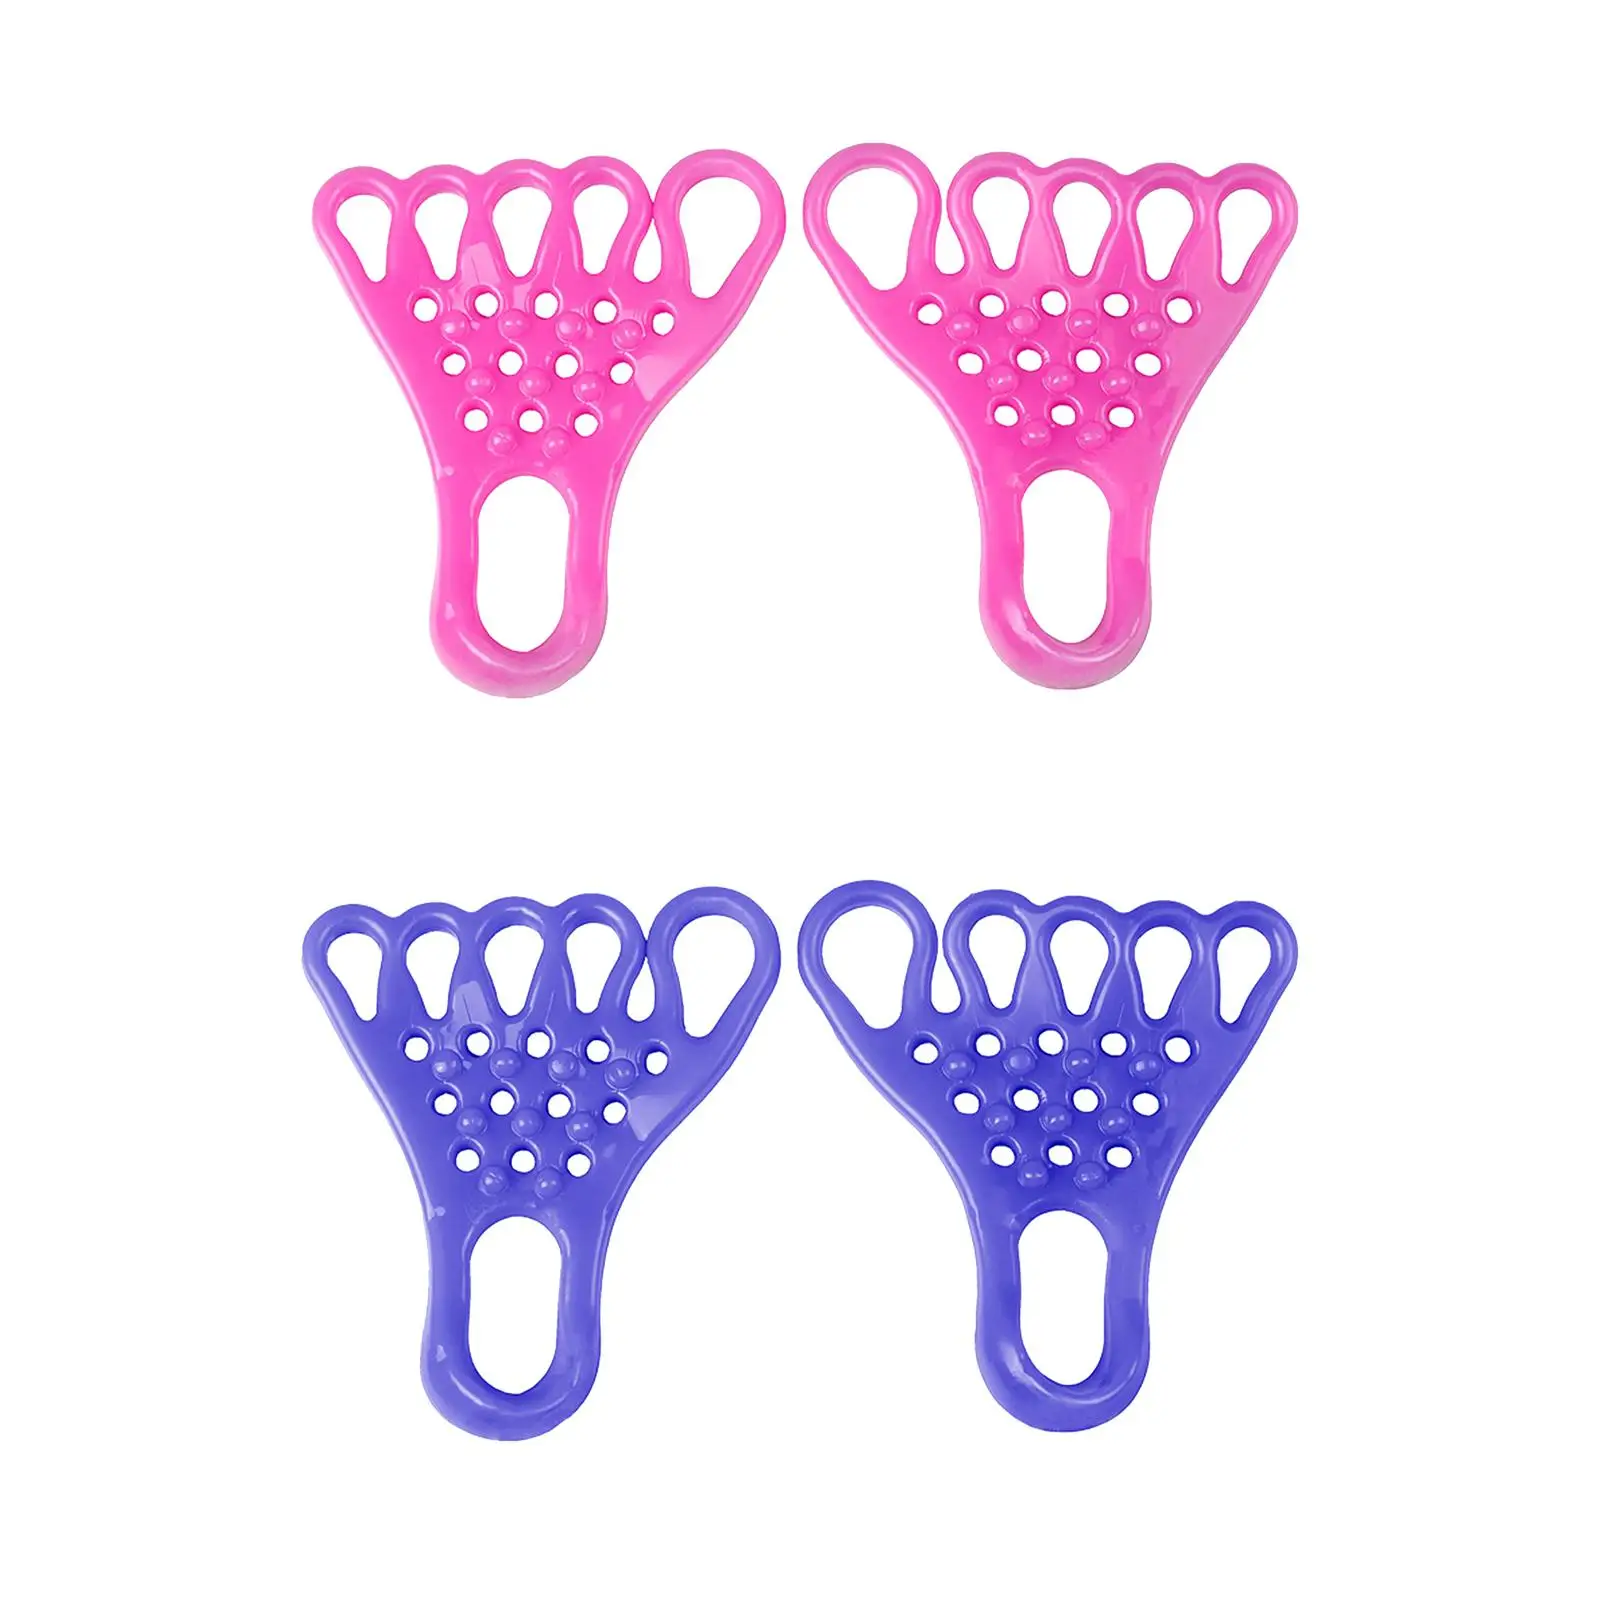 Toe Straightener Foot Care Stretcher Hammer Toe Splints Toe Spacer for Yoga Overlapping Toes Big Toe Bunions Hallux Valgus